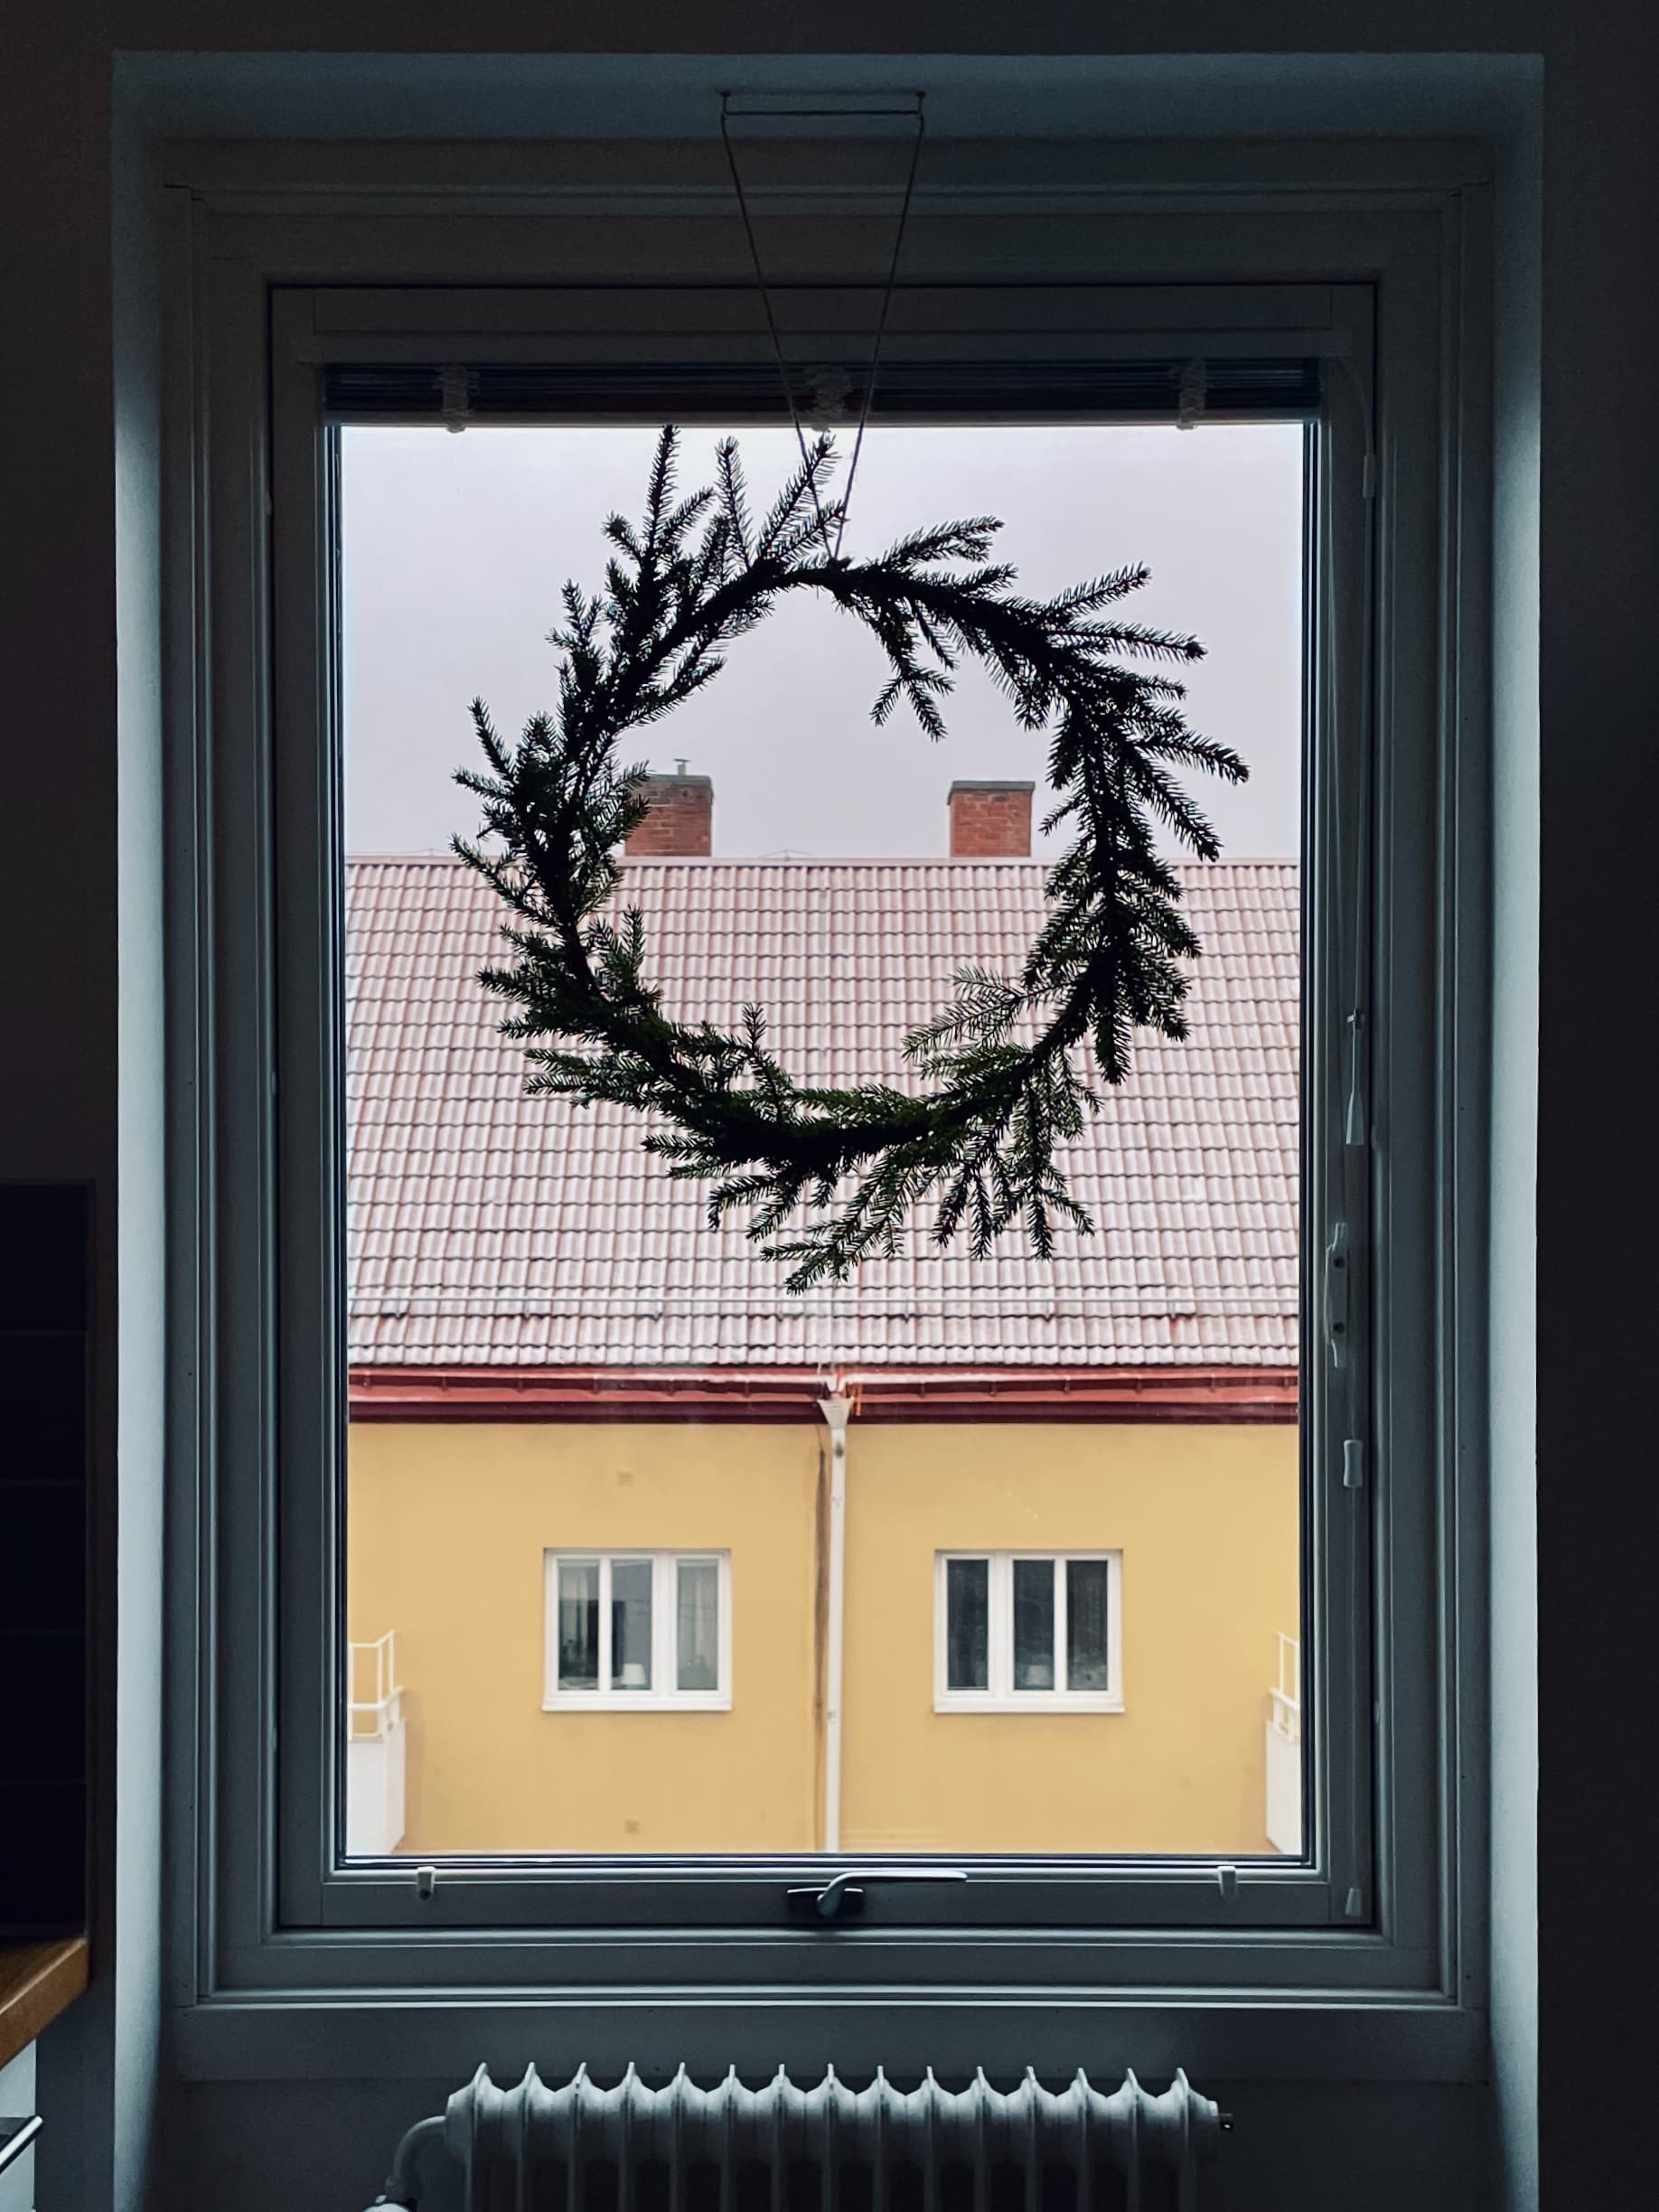 A silhouette of a wreath tied with spruce twigs is hanging in a window.